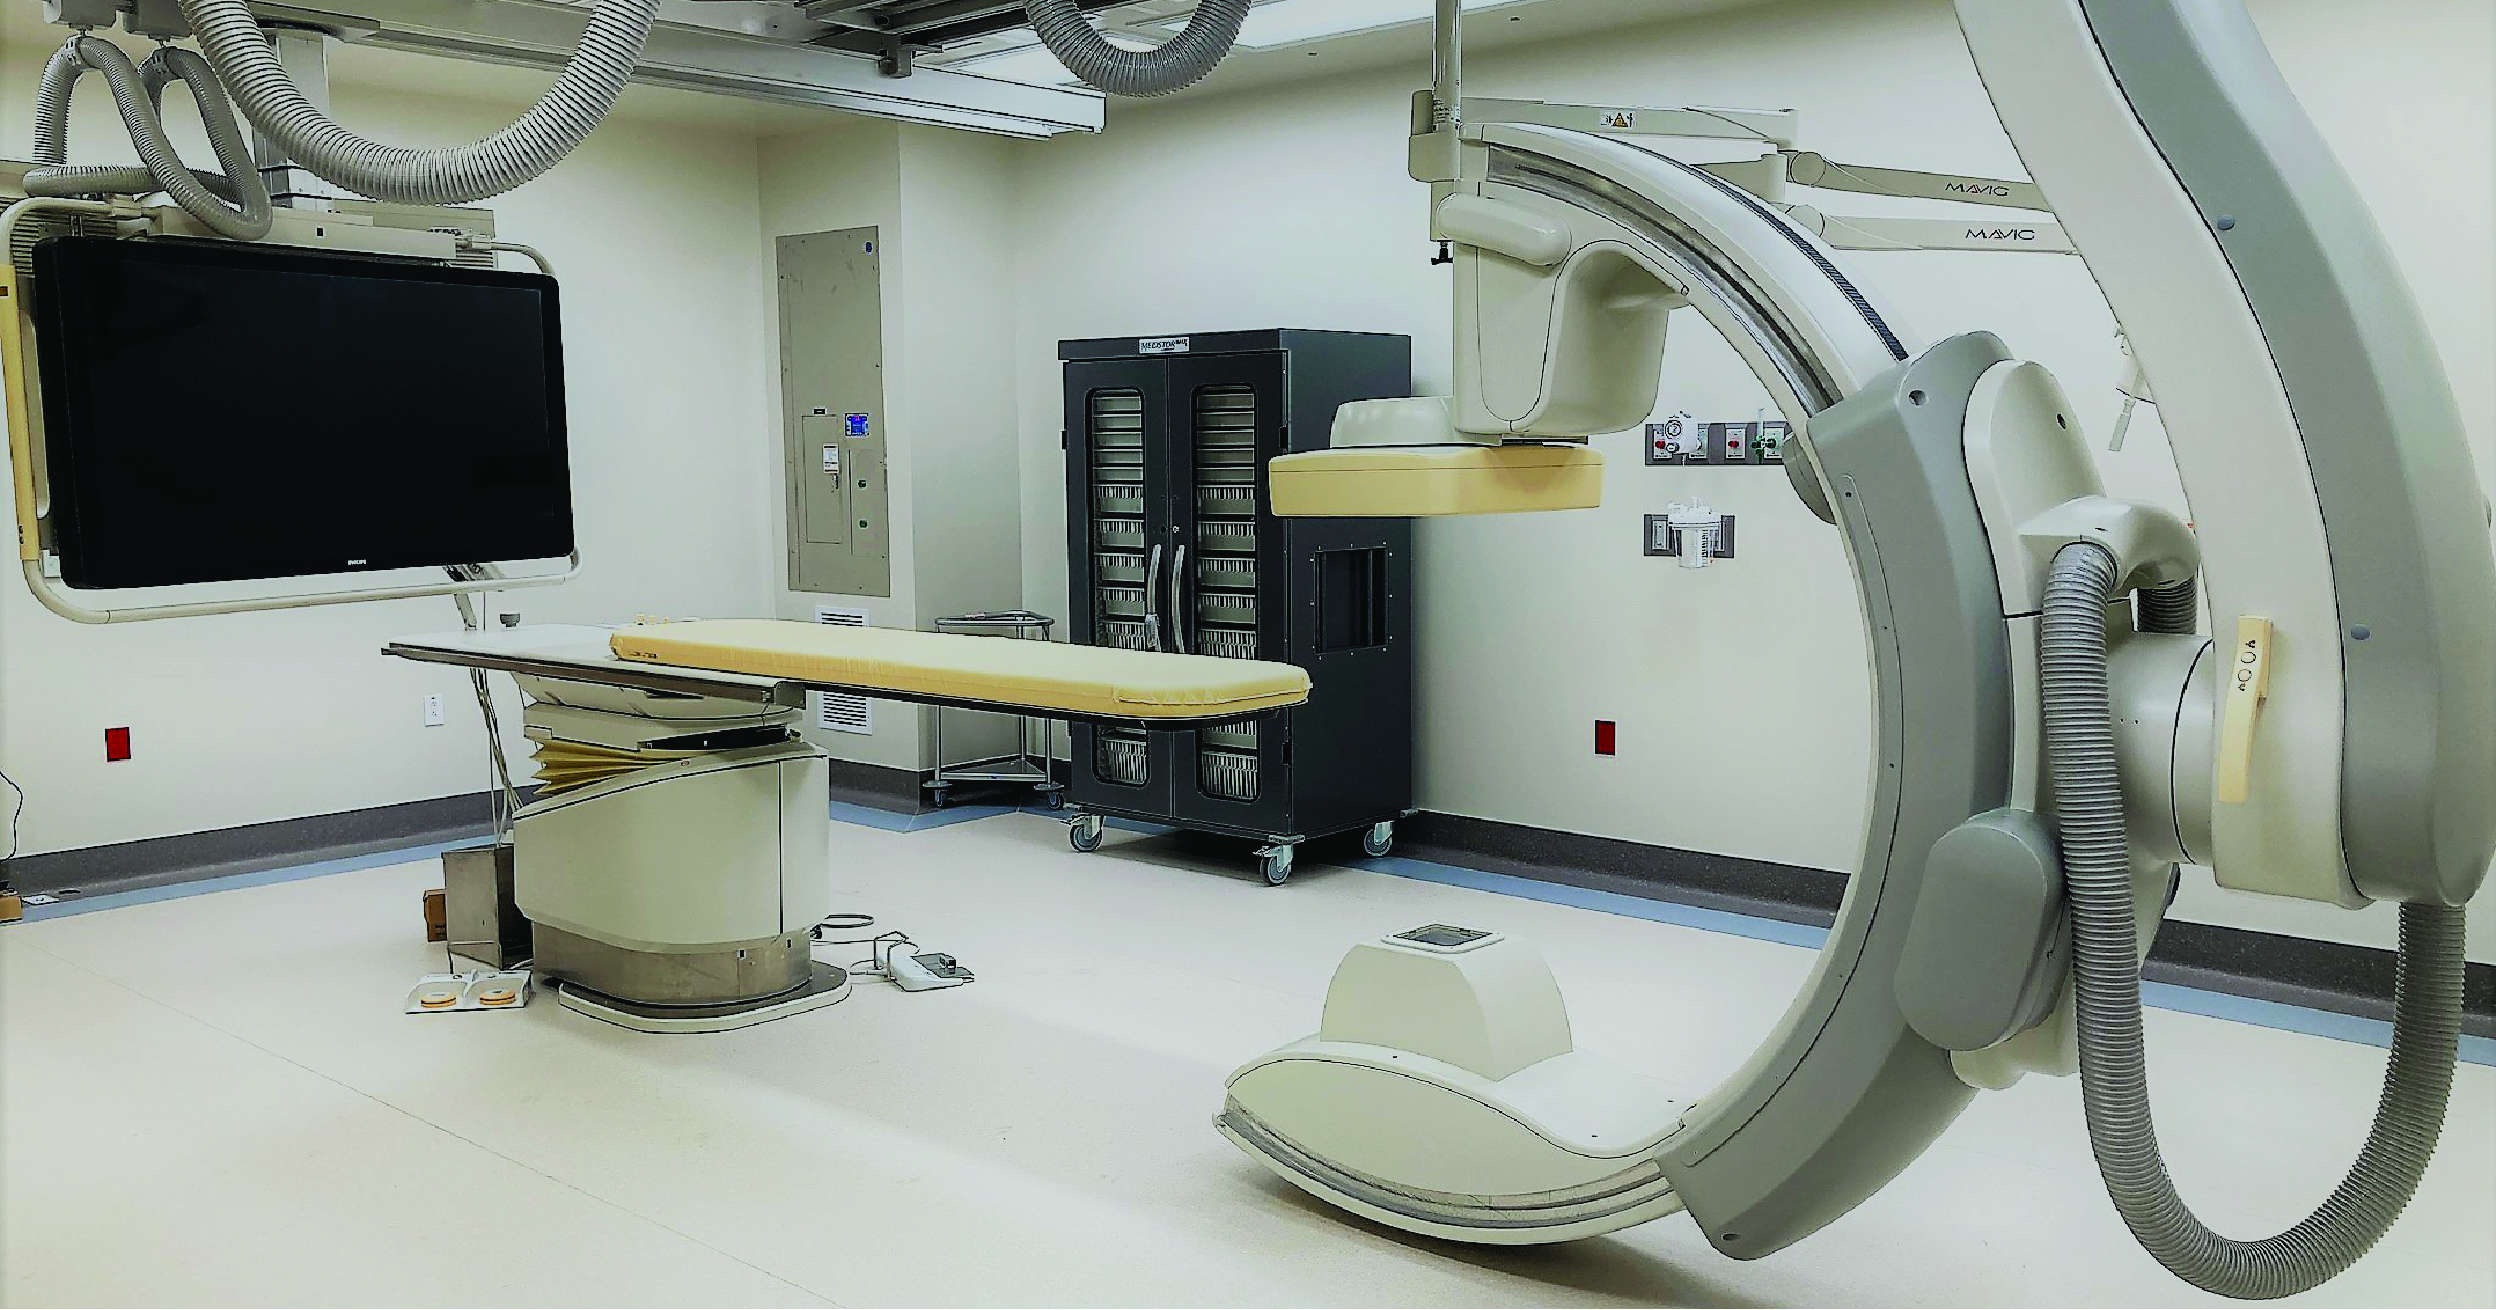 The Best Cath System for an Office-Based Lab